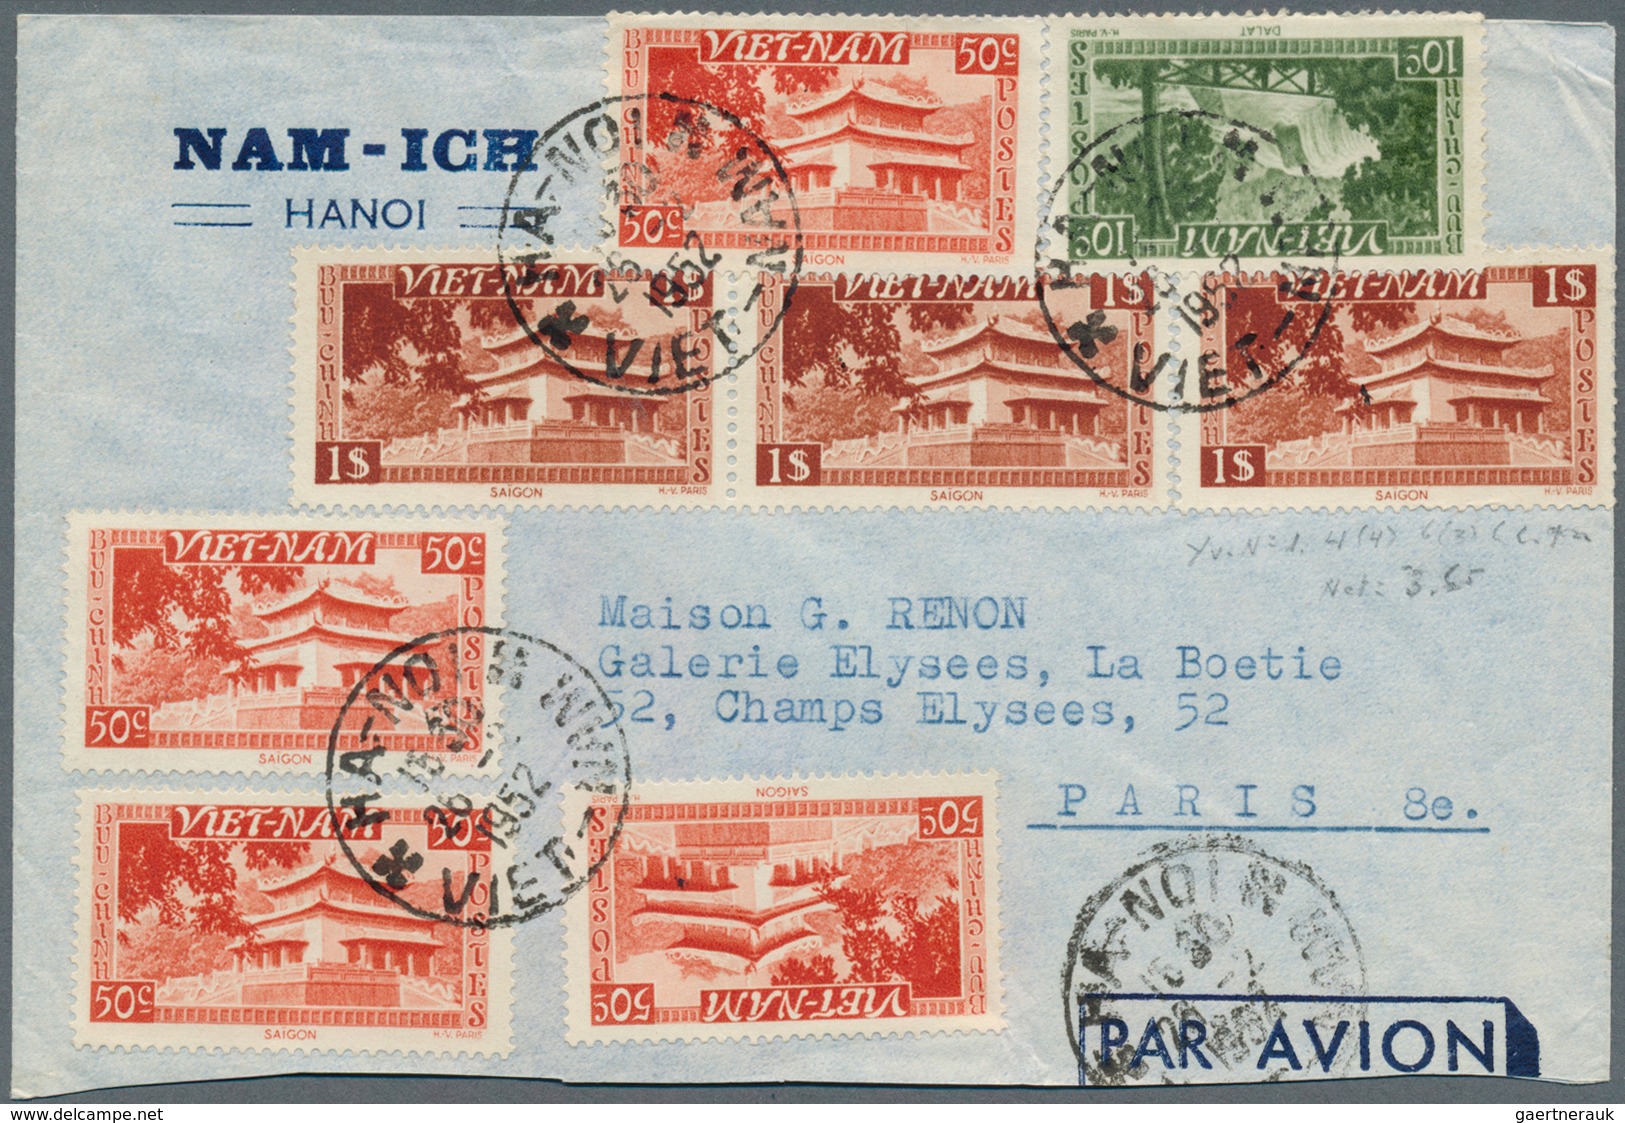 24646 Asien: 1900/1955, 3 Postcards and 6 letters from China, Vietnam, Russia, Indochina and other country